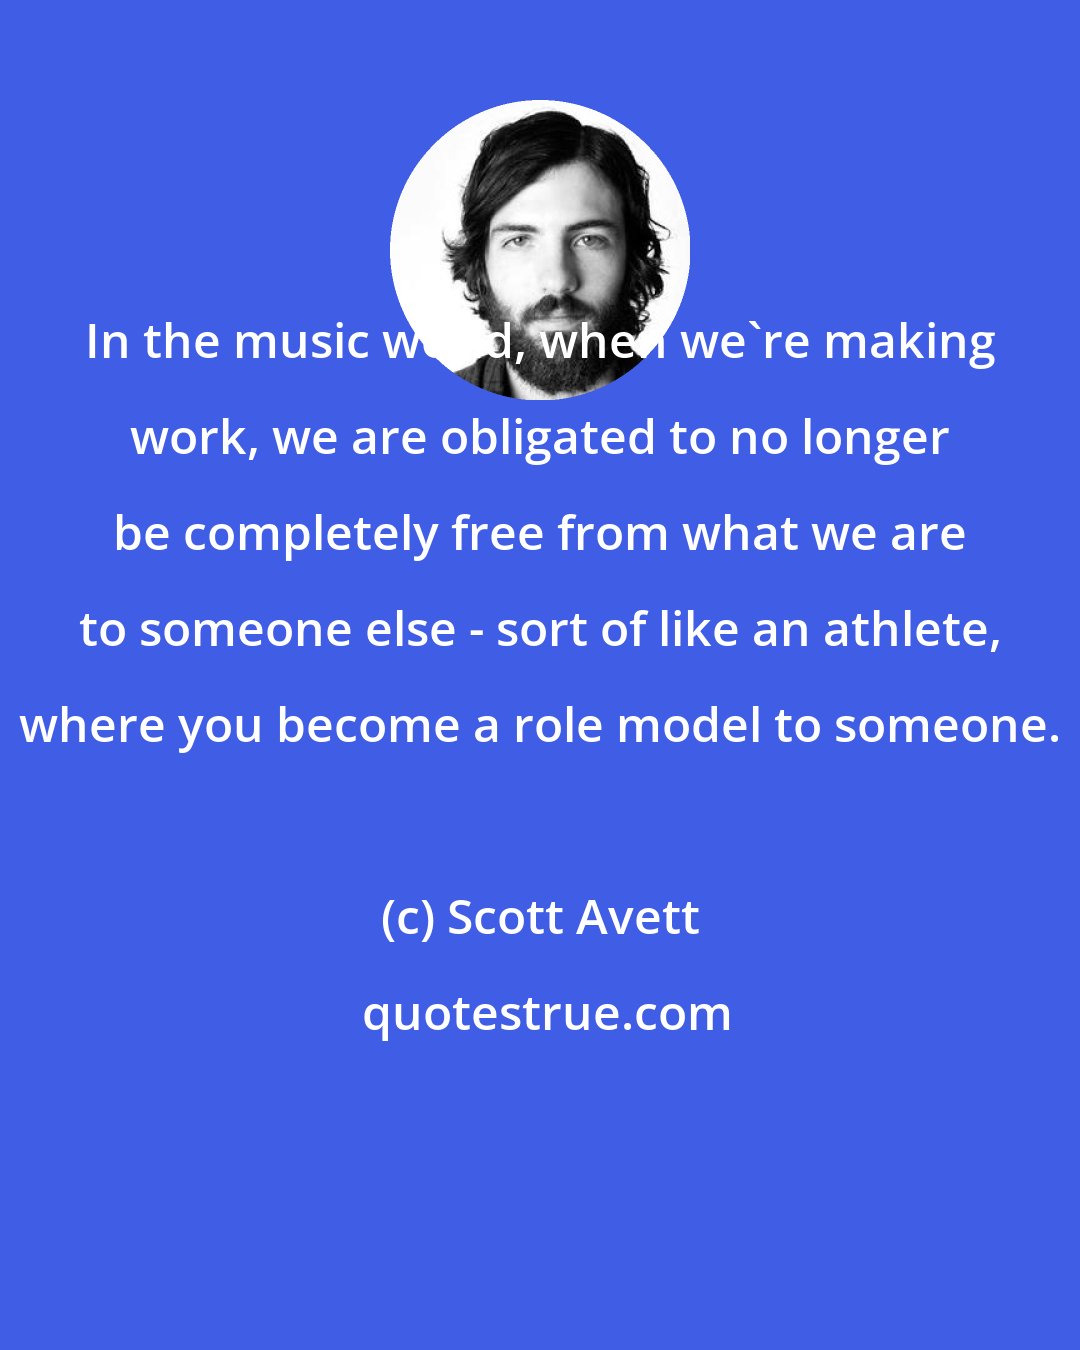 Scott Avett: In the music world, when we're making work, we are obligated to no longer be completely free from what we are to someone else - sort of like an athlete, where you become a role model to someone.